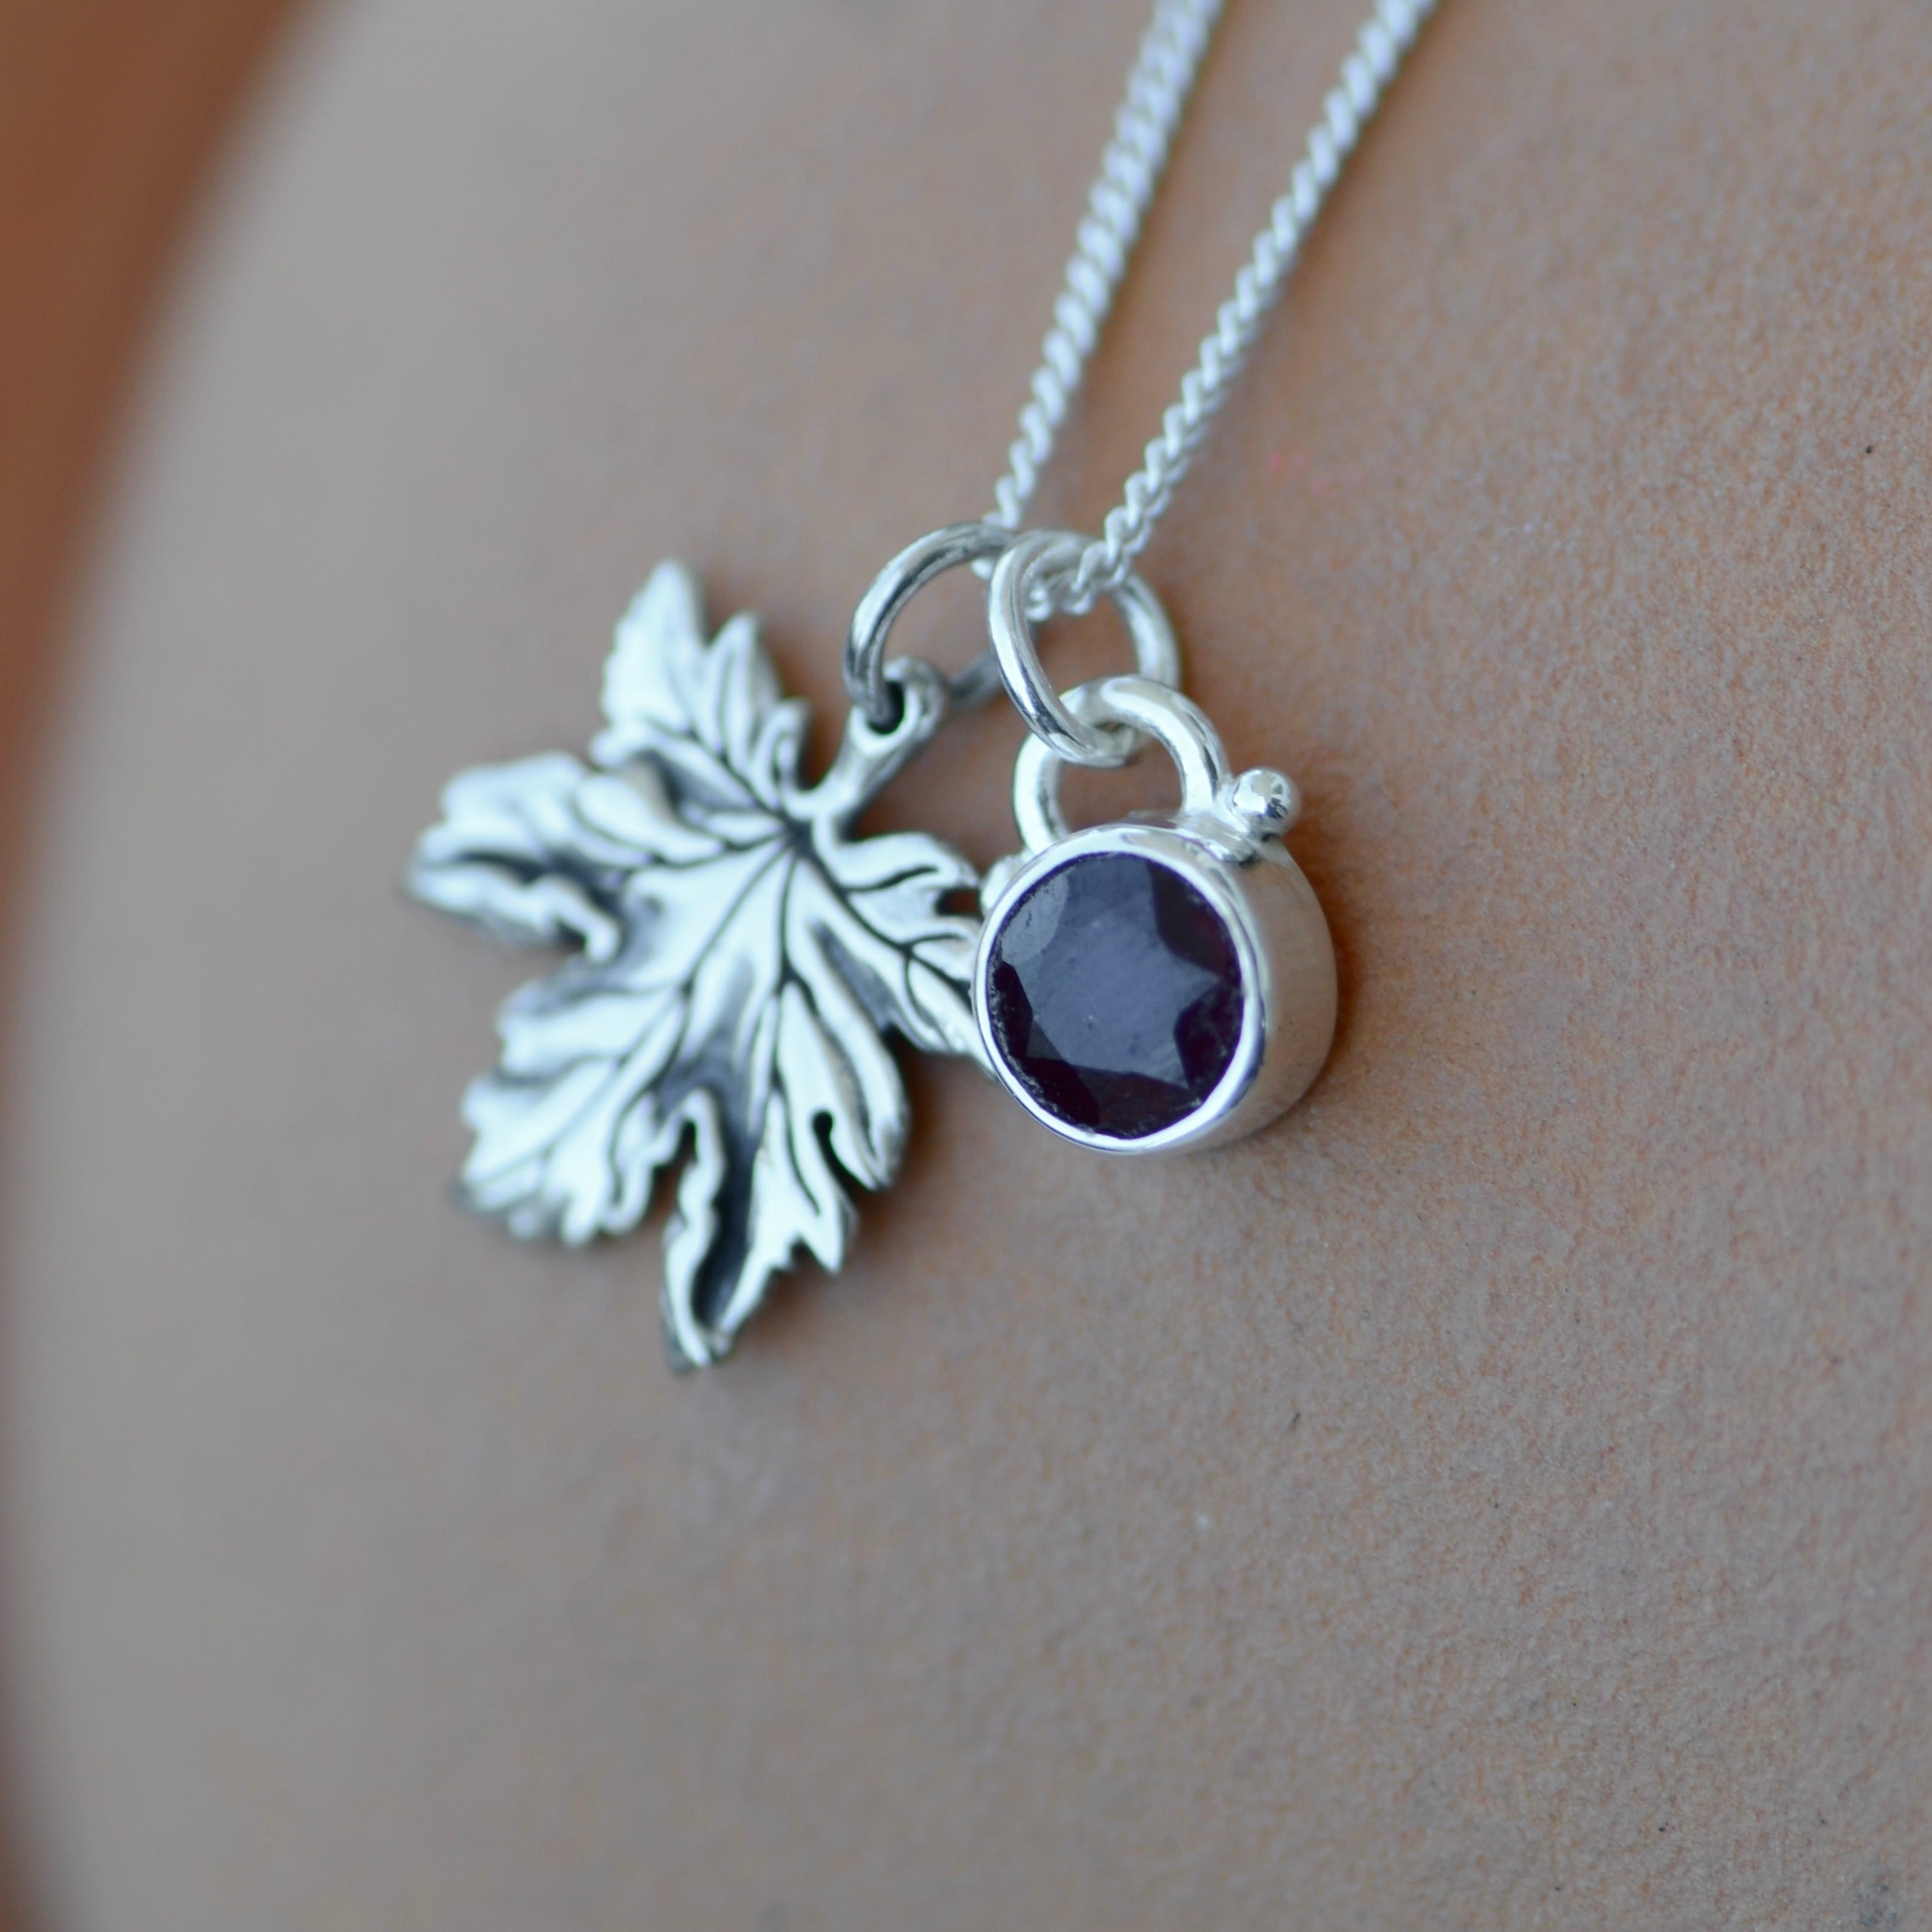 Tiny Canadian Maple Leaf Necklace Silver